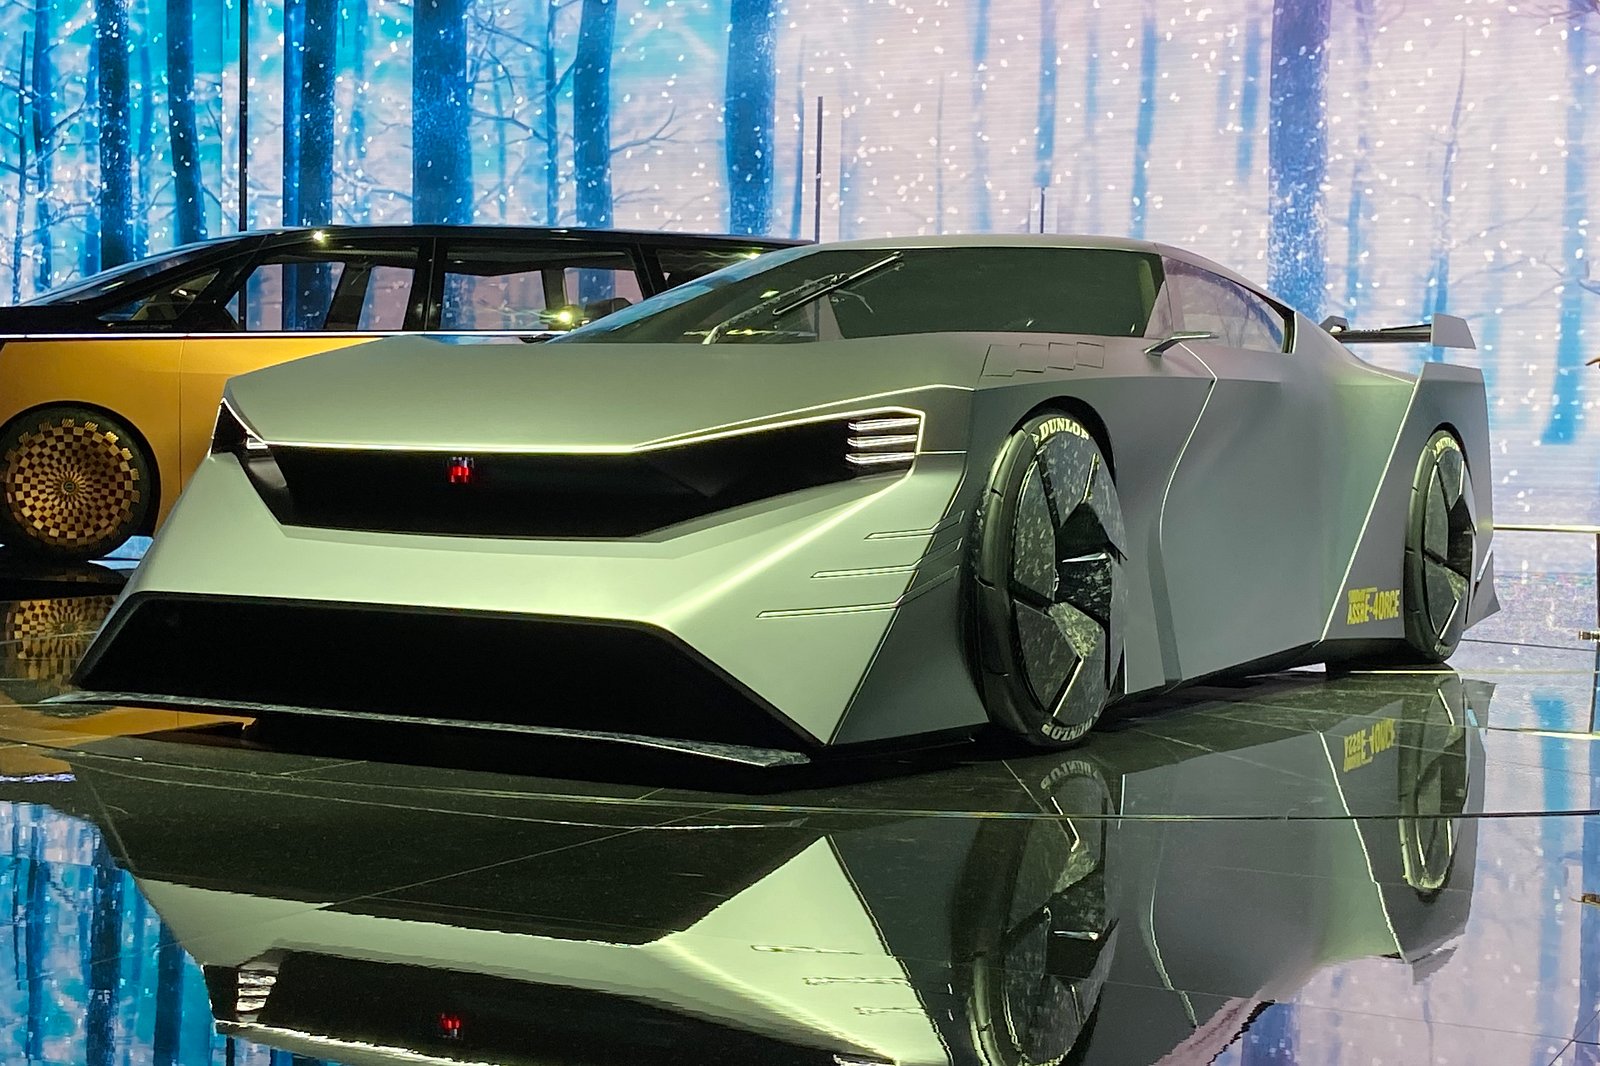 Nissan's New Hyper Force Sports Car Delivers 1,341 Horsepower